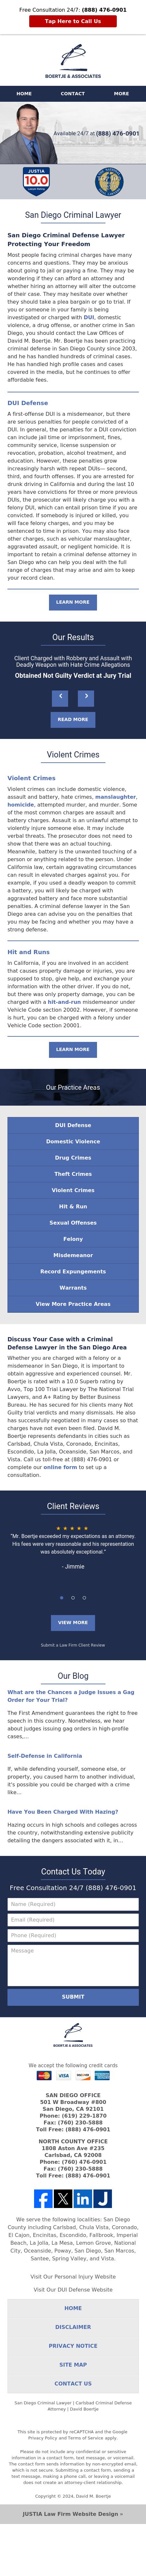 Law Offices of David M. Boertje - San Diego CA Lawyers